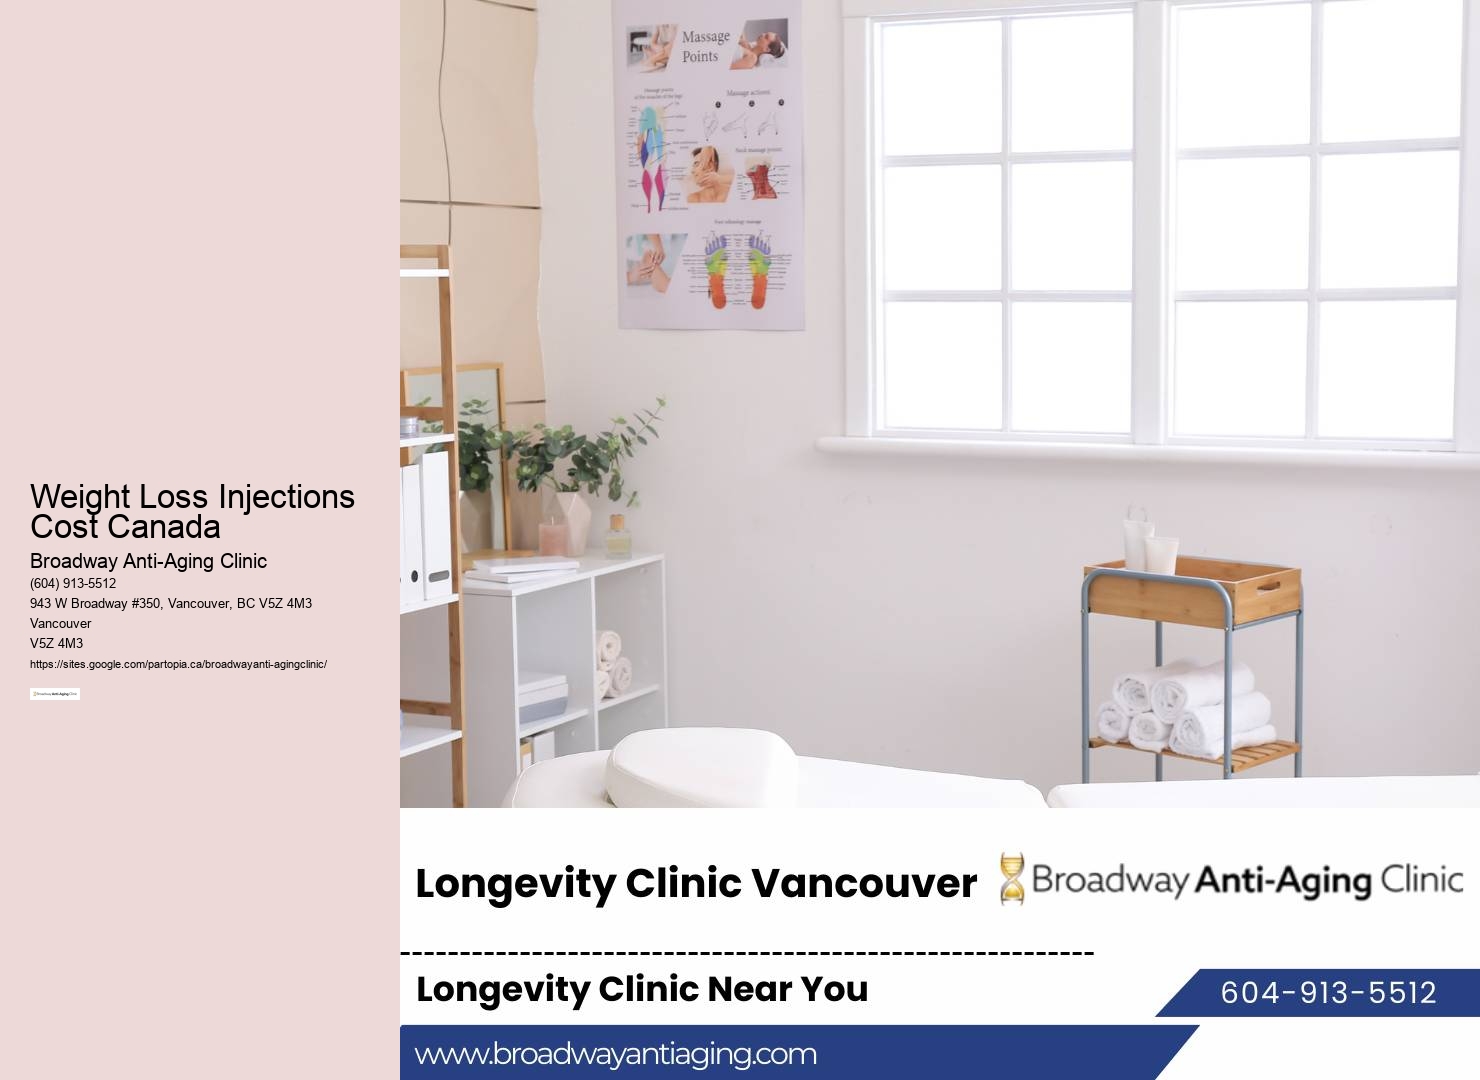 Weight Loss Doctor Vancouver